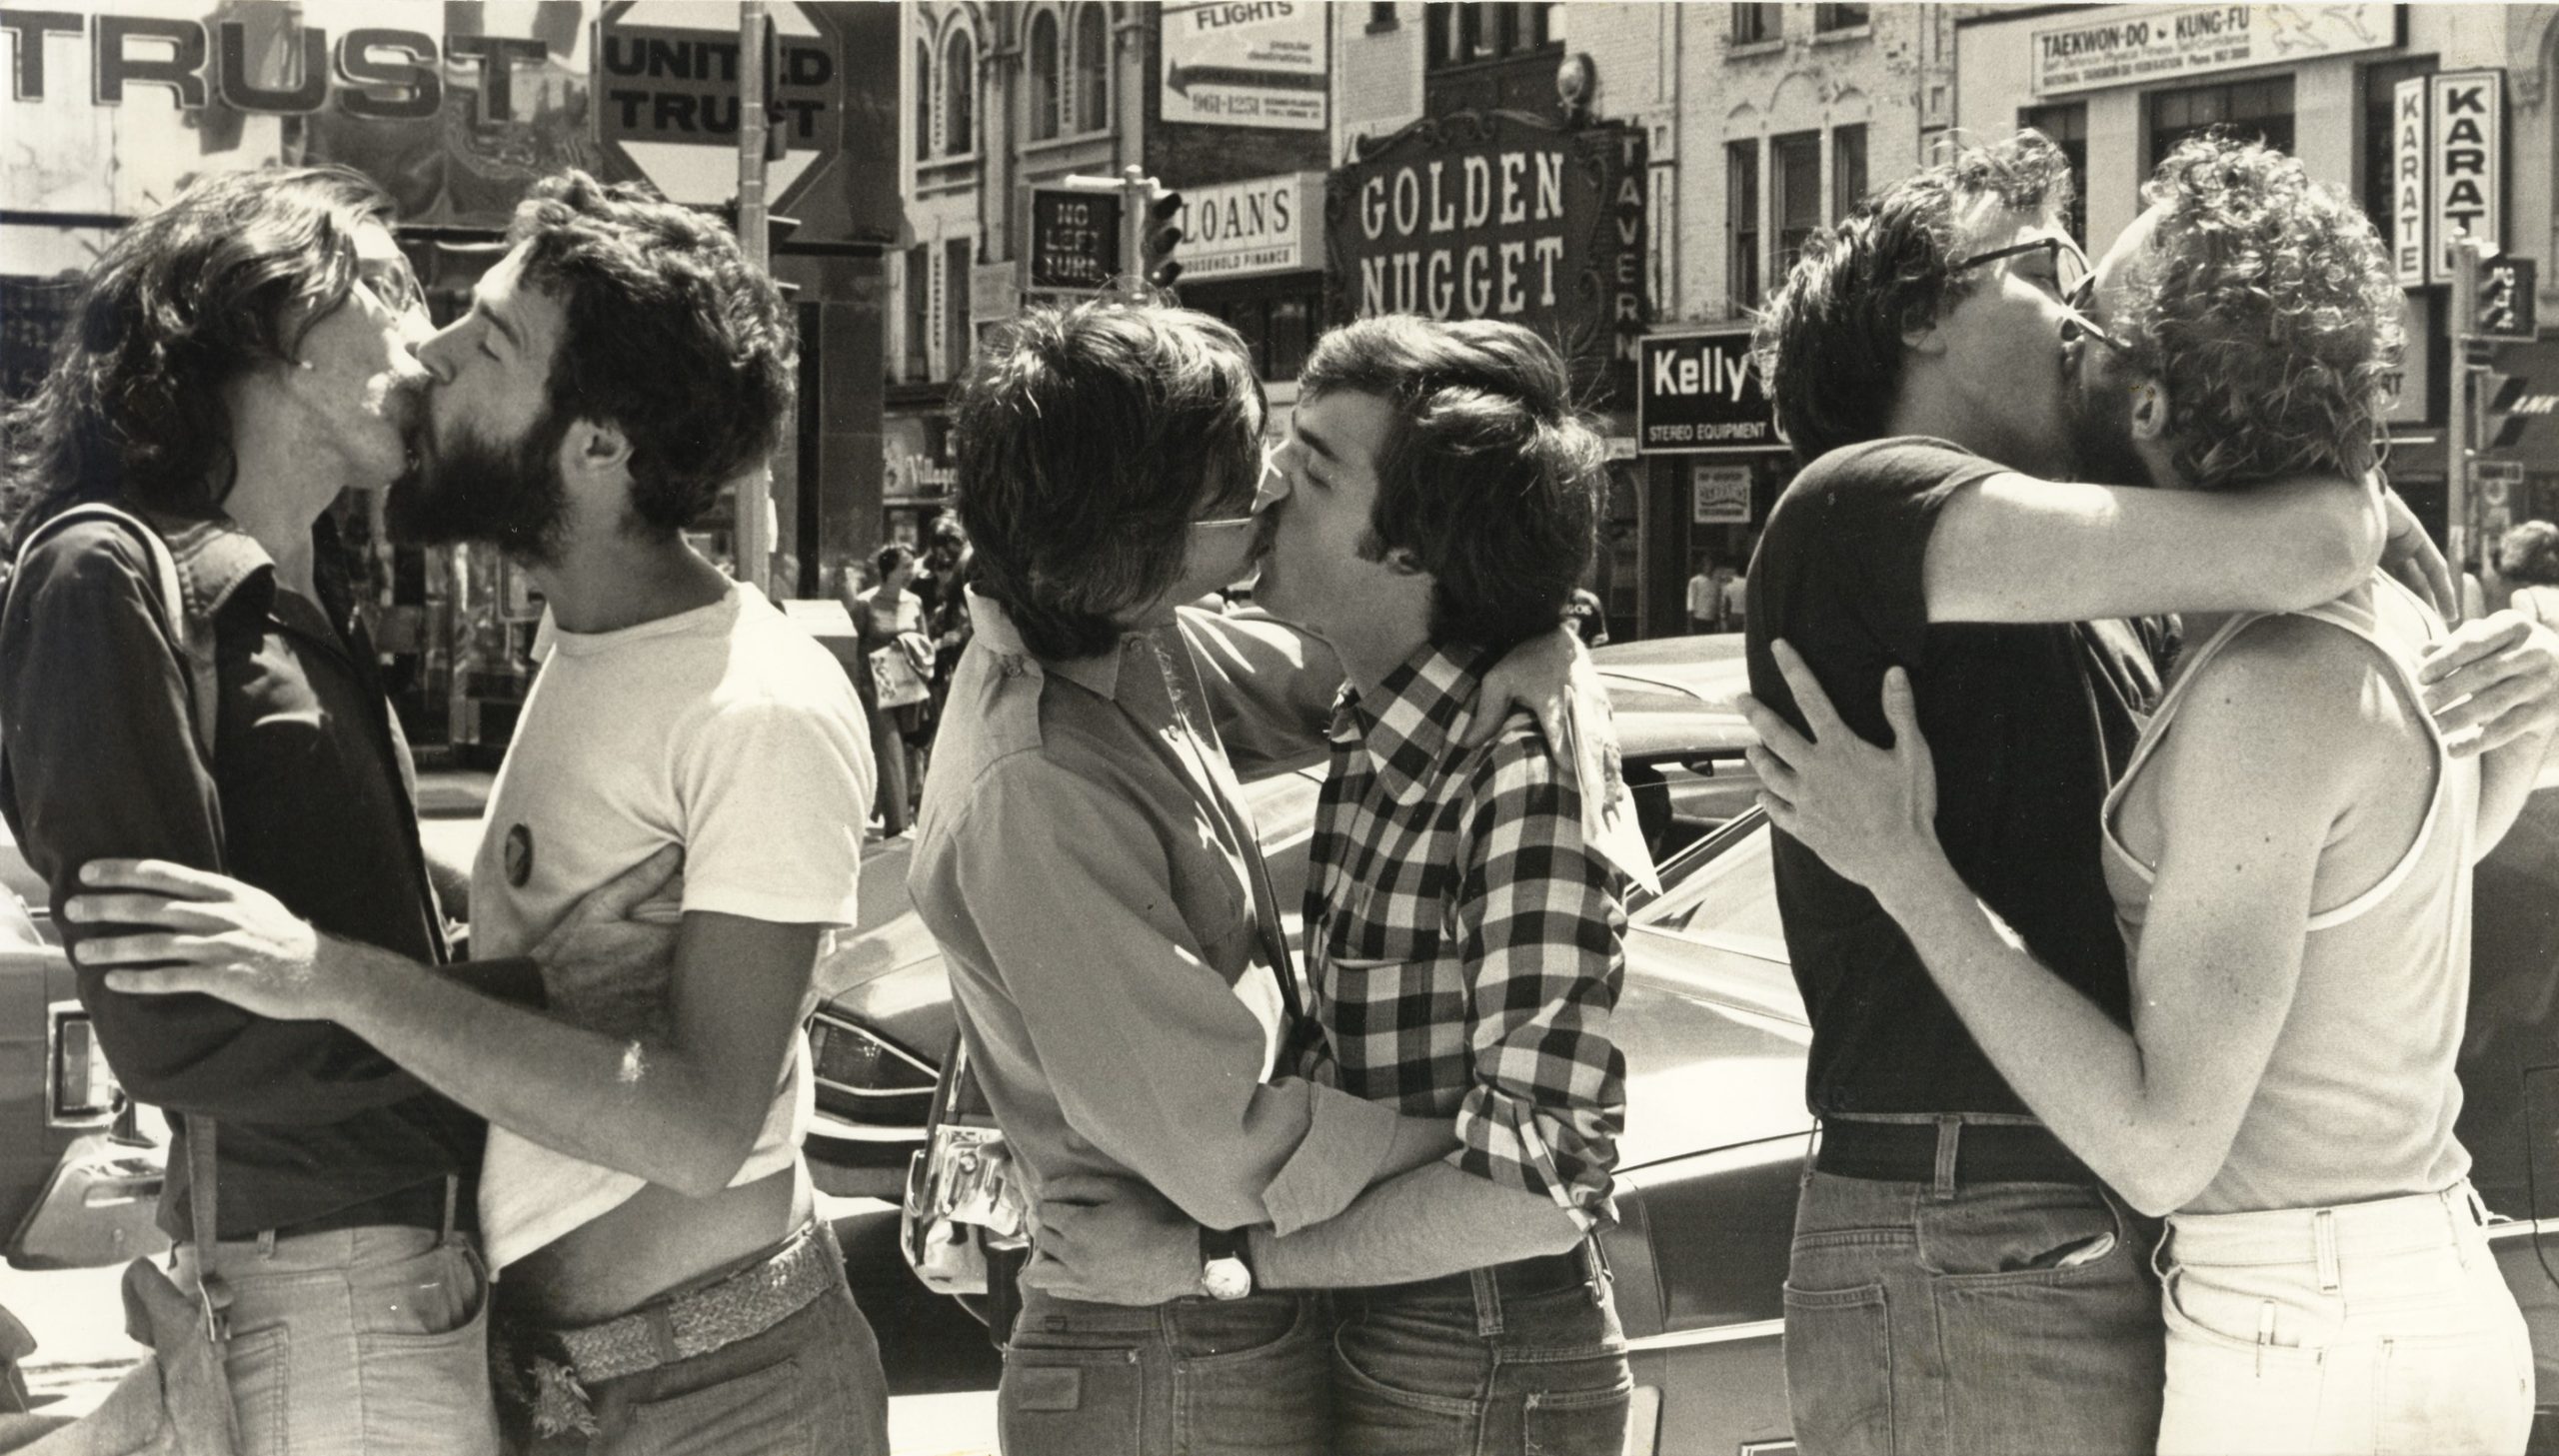 [Kiss-in at the corner of Yonge and Bloor, Toronto, 1976. Collection of the Canadian Gay and Lesbian Archives, Toronto.]